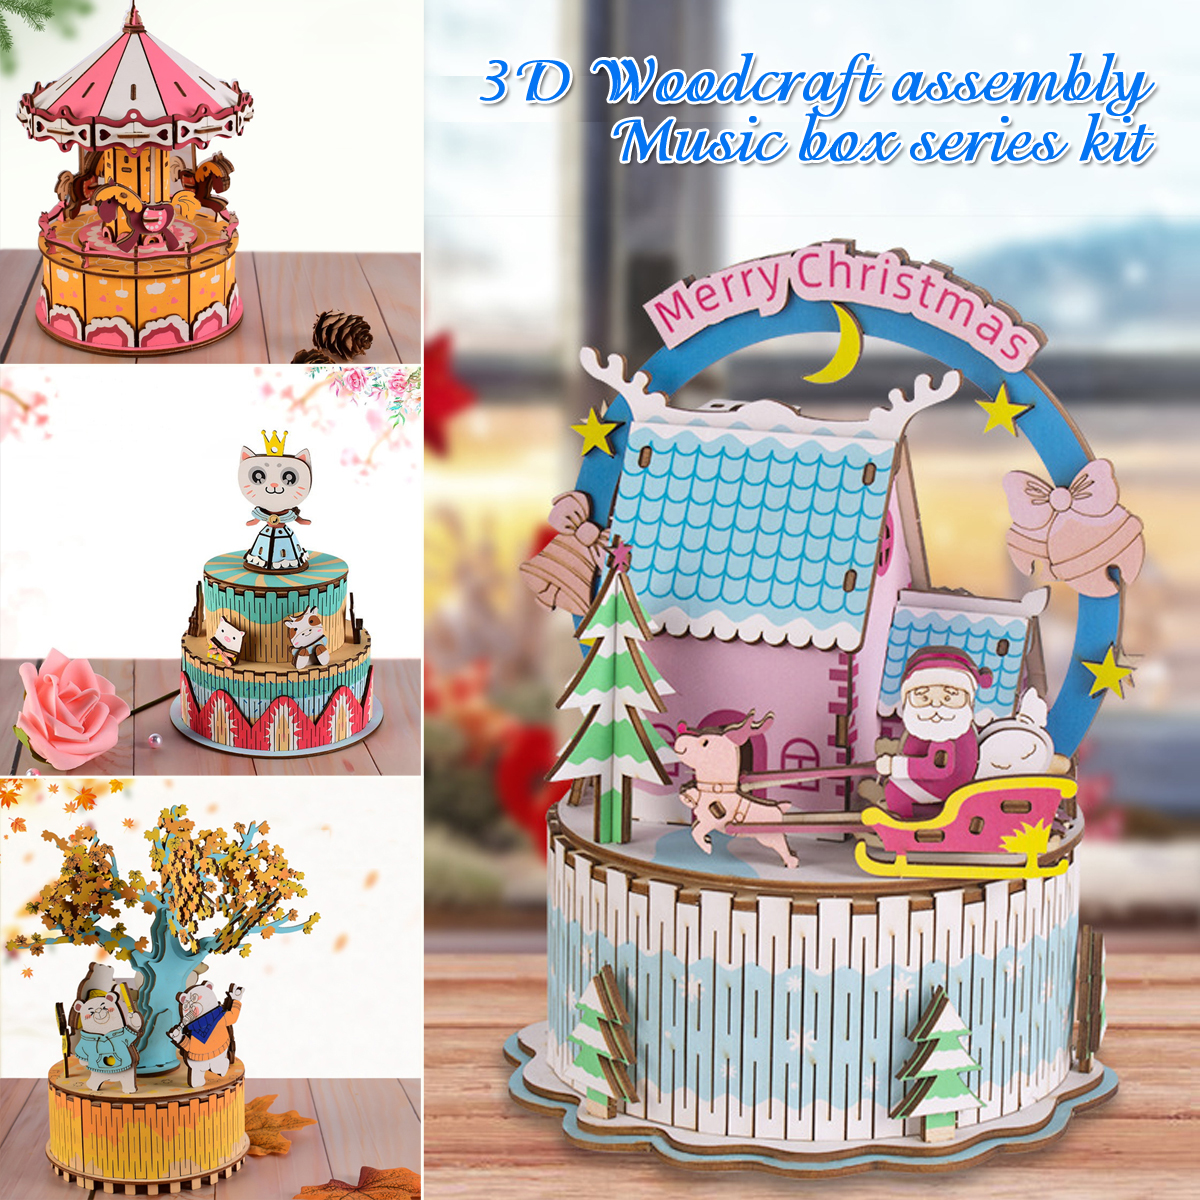 3D-Woodcraft-Assembly-Music-Box-Series-Kit-Jigsaw-Puzzle-Decoration-Toy-Model-for-Kids-Gift-1635634-2